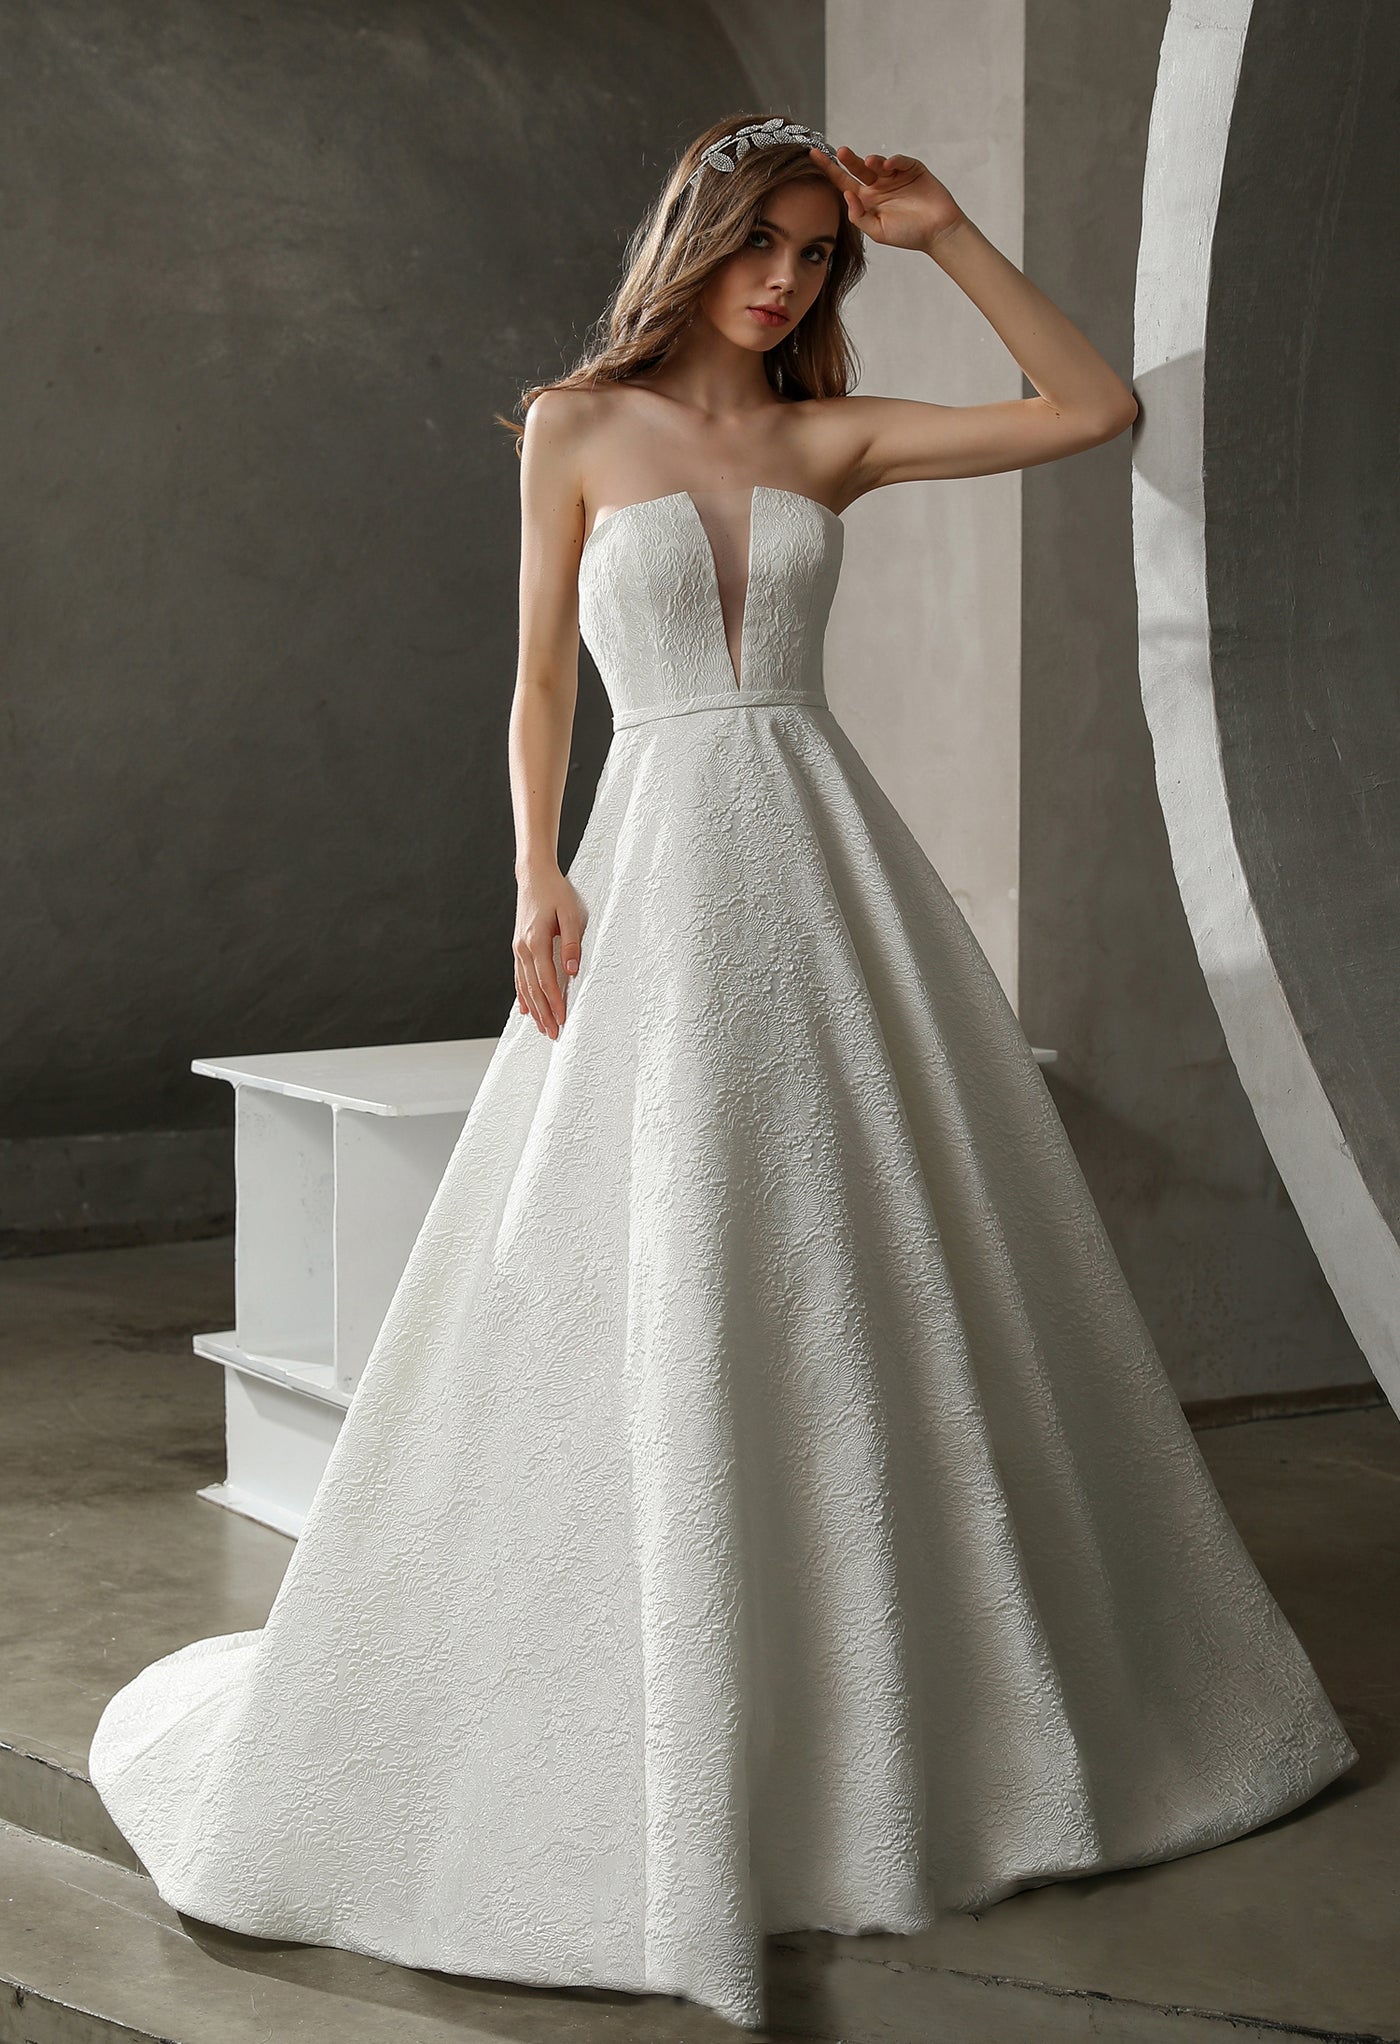 Strapless Ball Gown with Satin Jacquard and Detachable Puff Sleeves